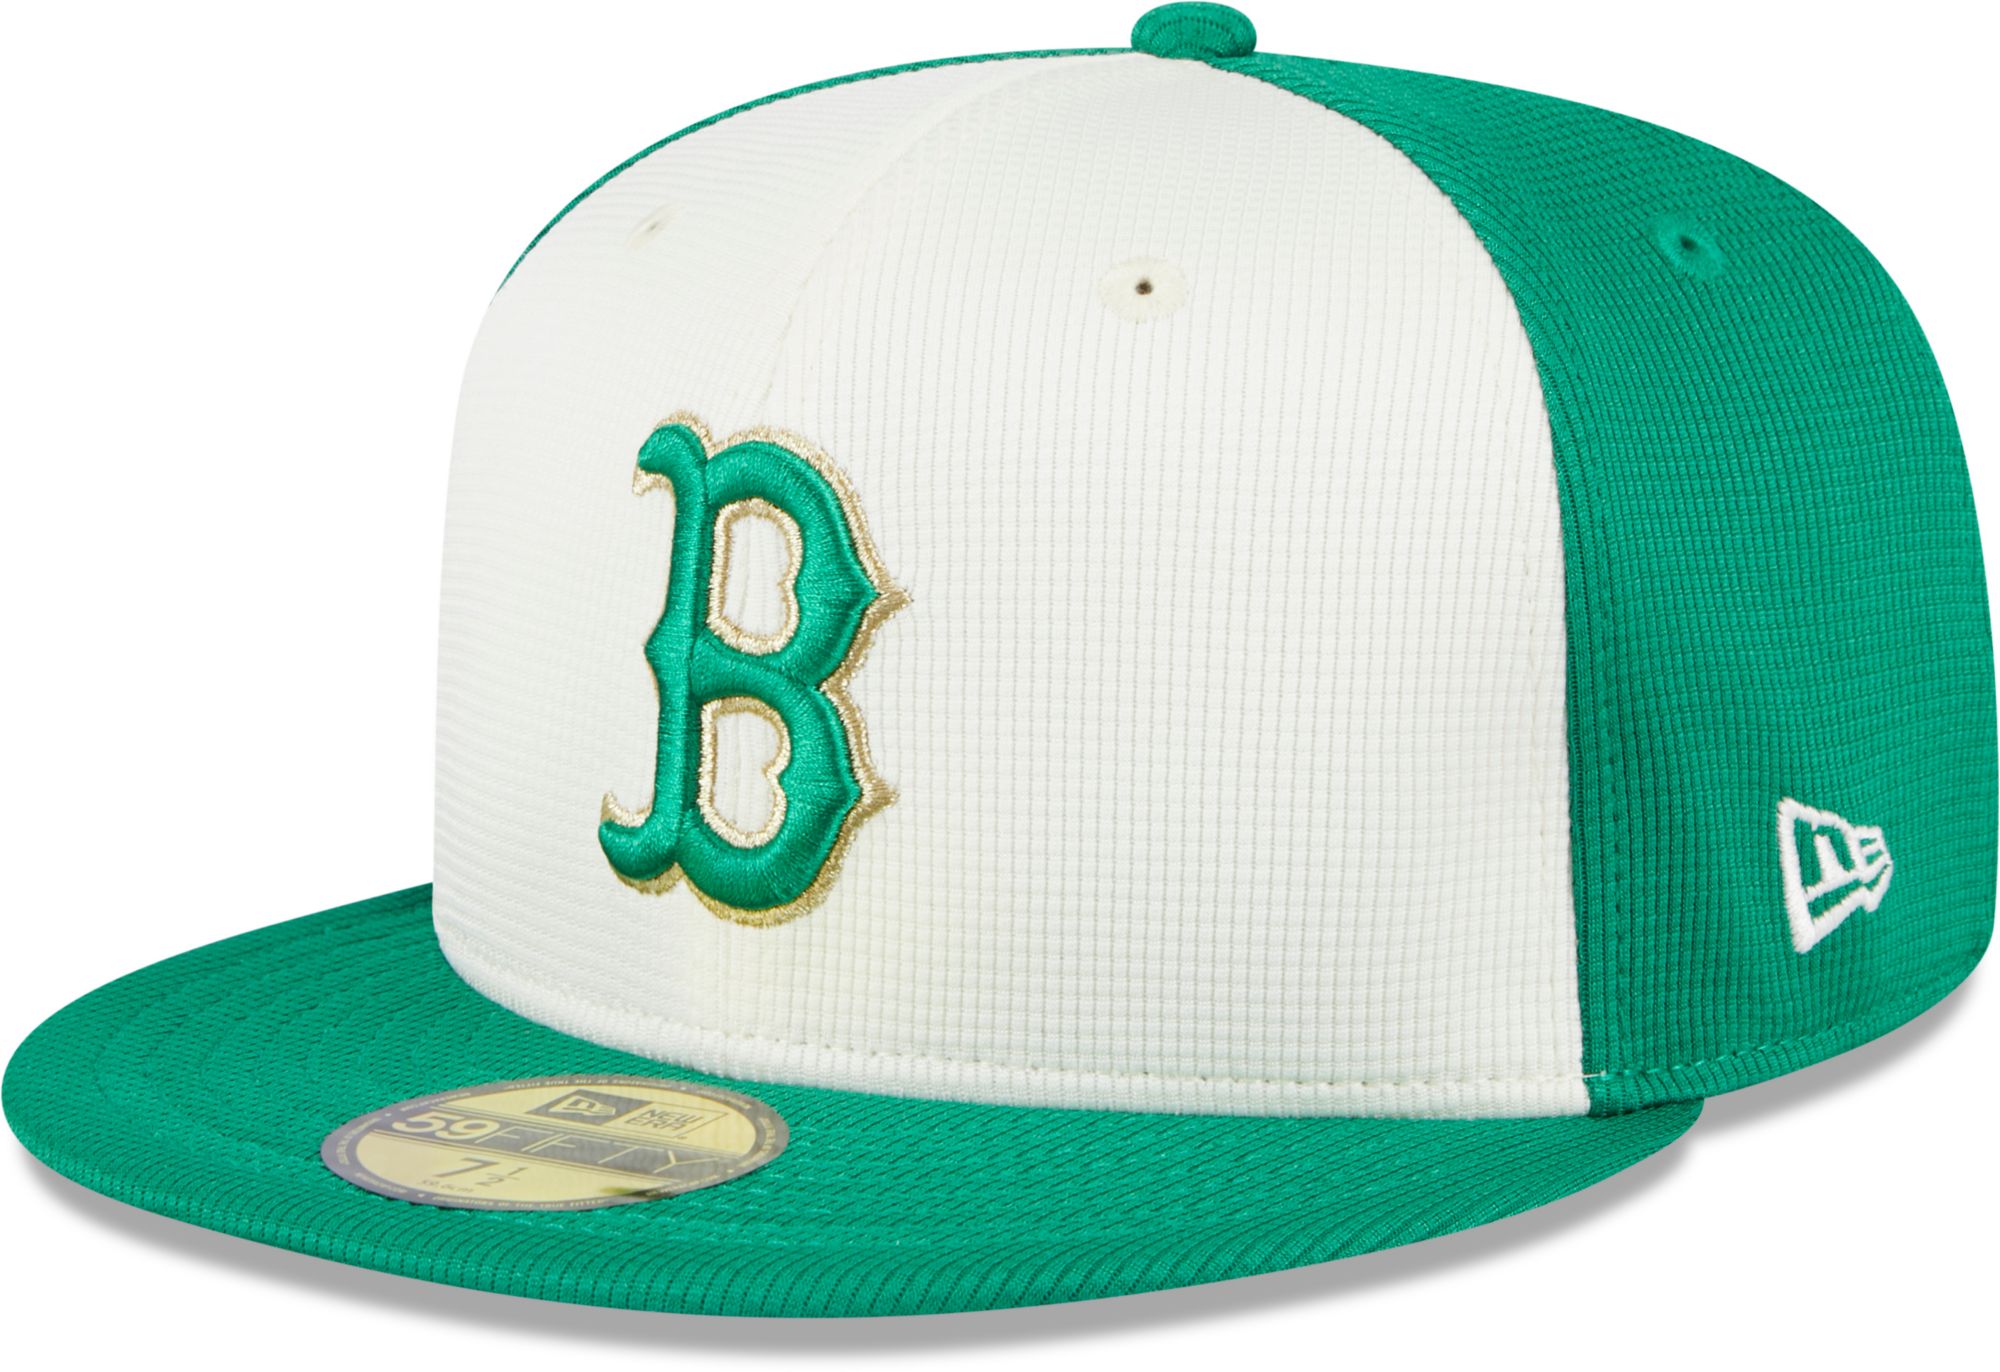 Men’s Boston Red Sox Gray Green 2021 St. Patrick’s Day Change Up Redux 39THIRTY Hats